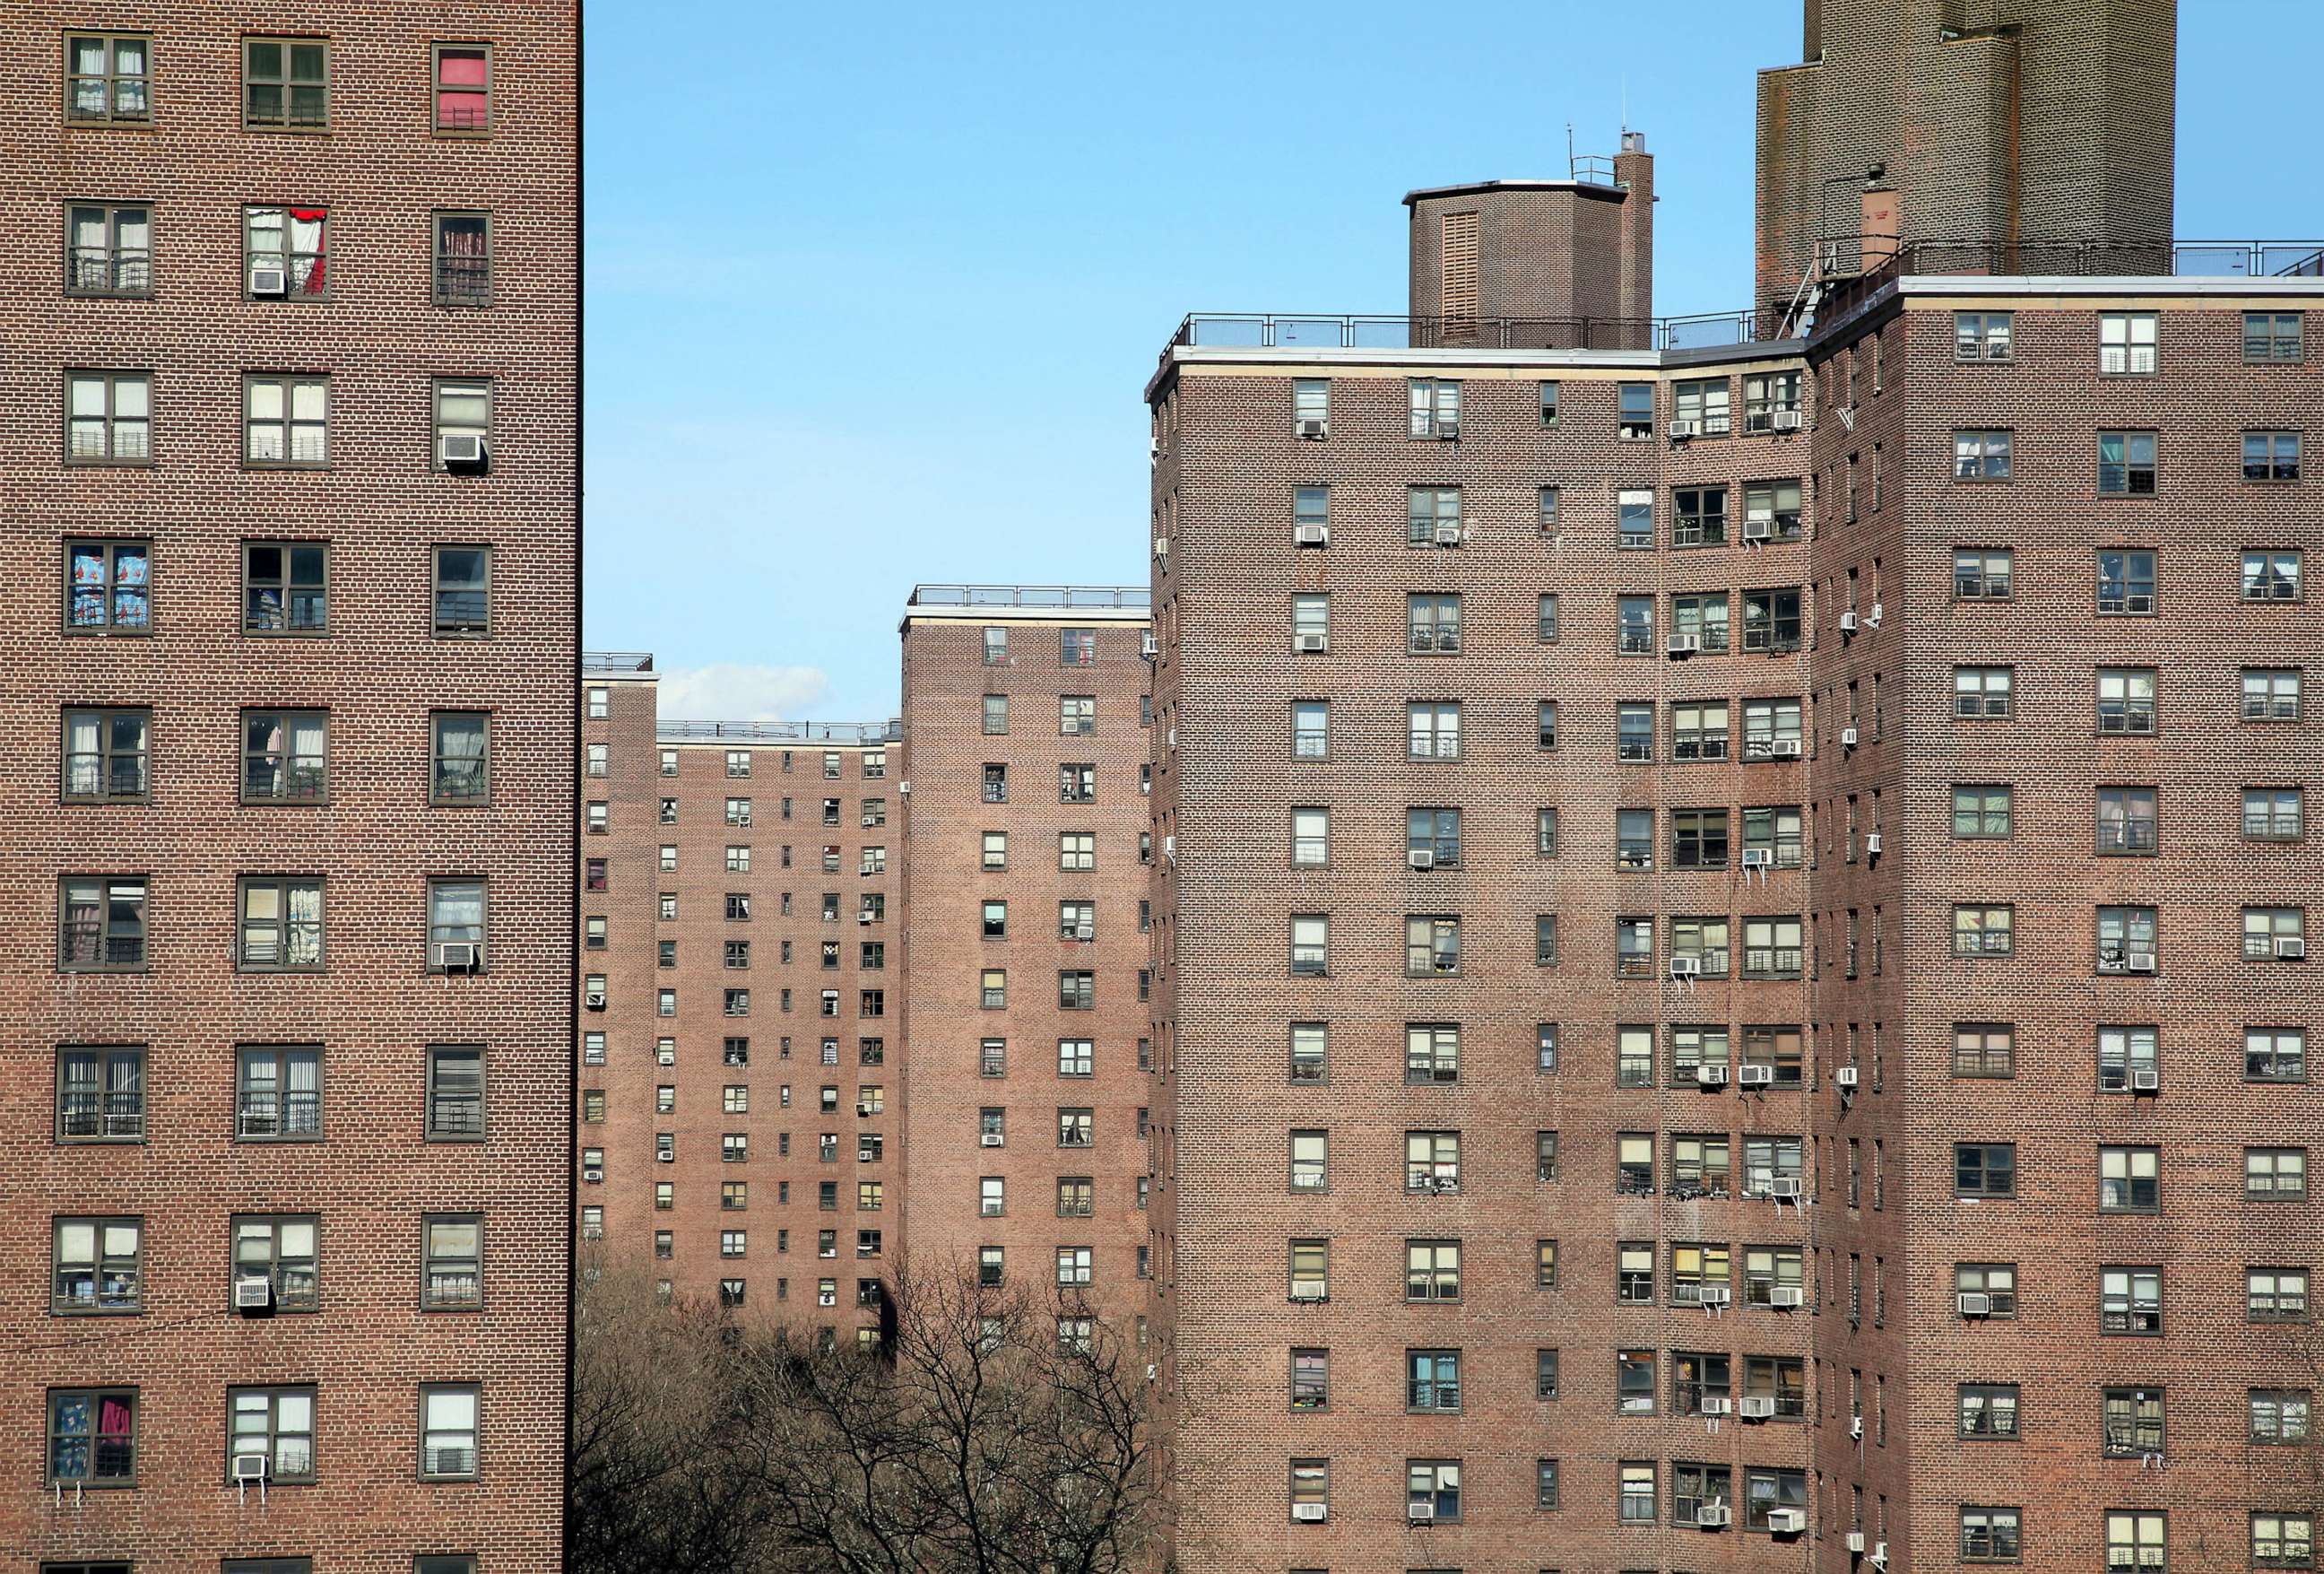 STOCK PHOTO: Row of apartments in housing project on Manhattan's Lower East Side, New York City